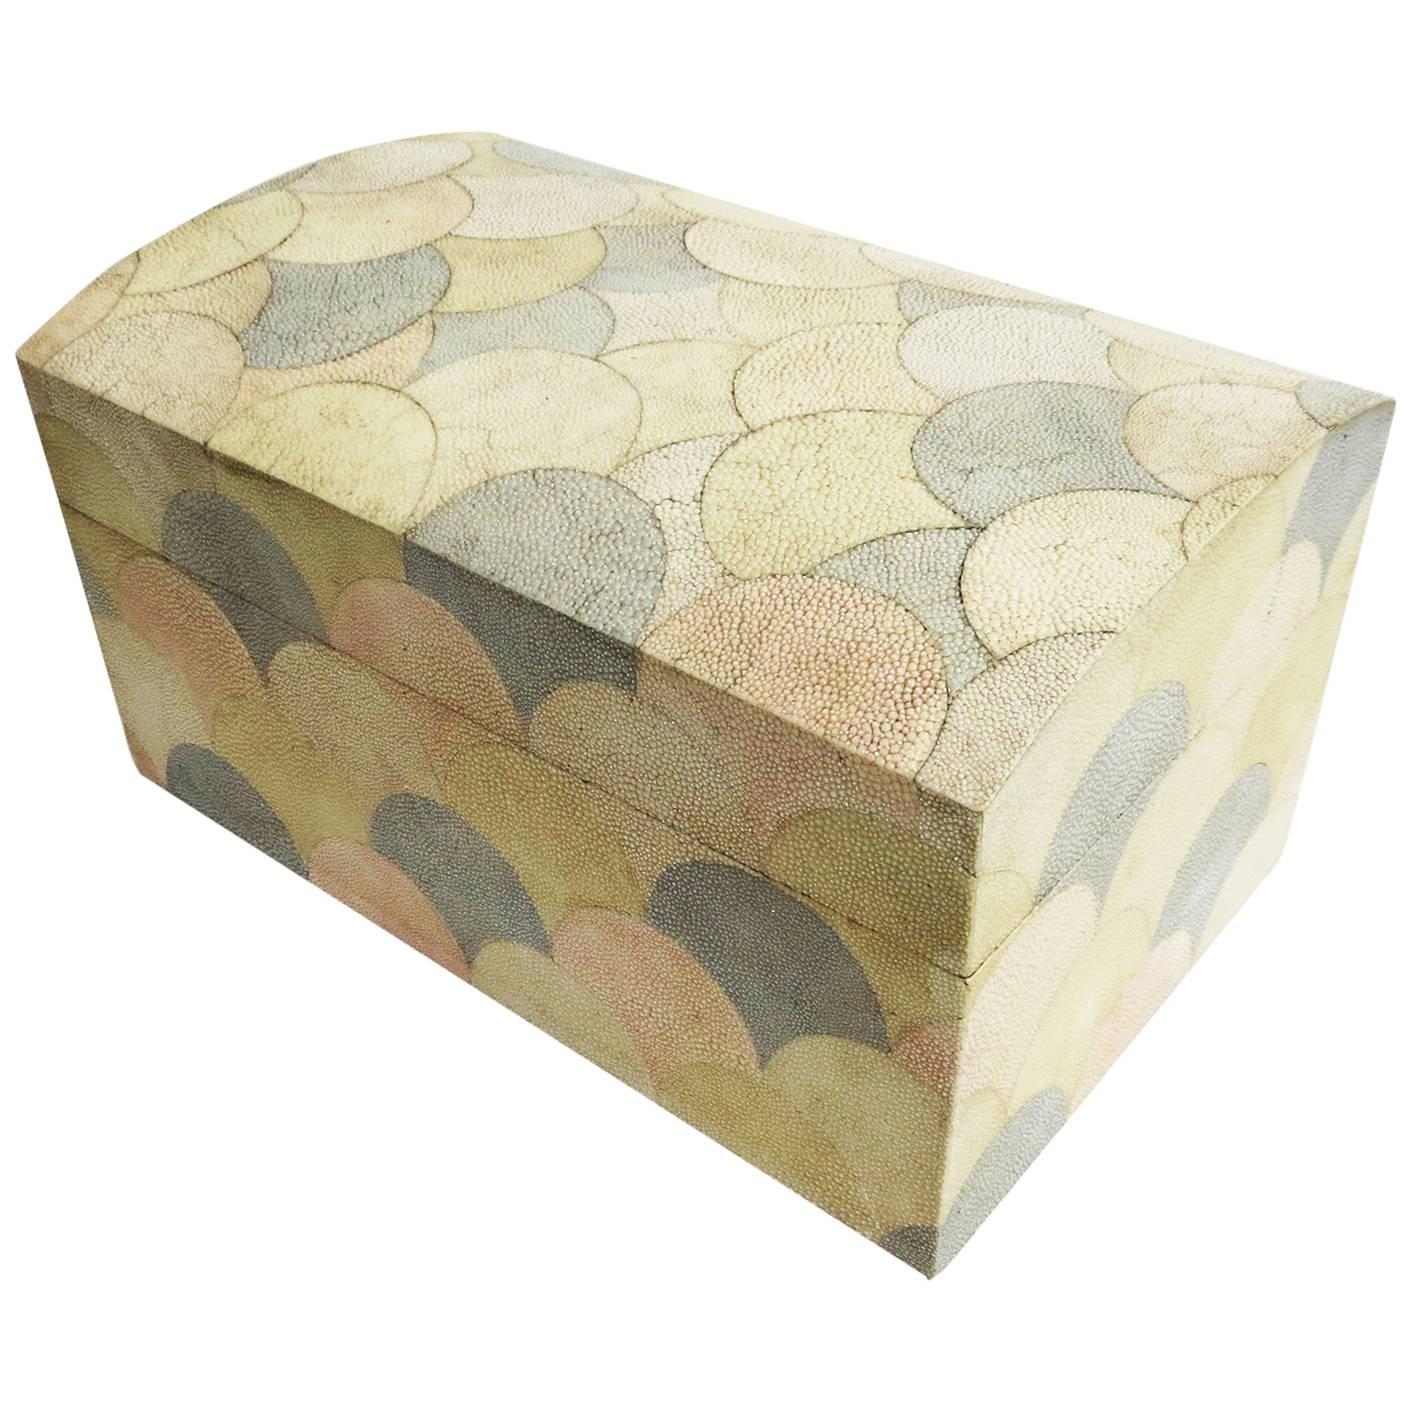 Maitland Smith Large Multi-Colored Shagreen Cigar or Dresser Box For Sale